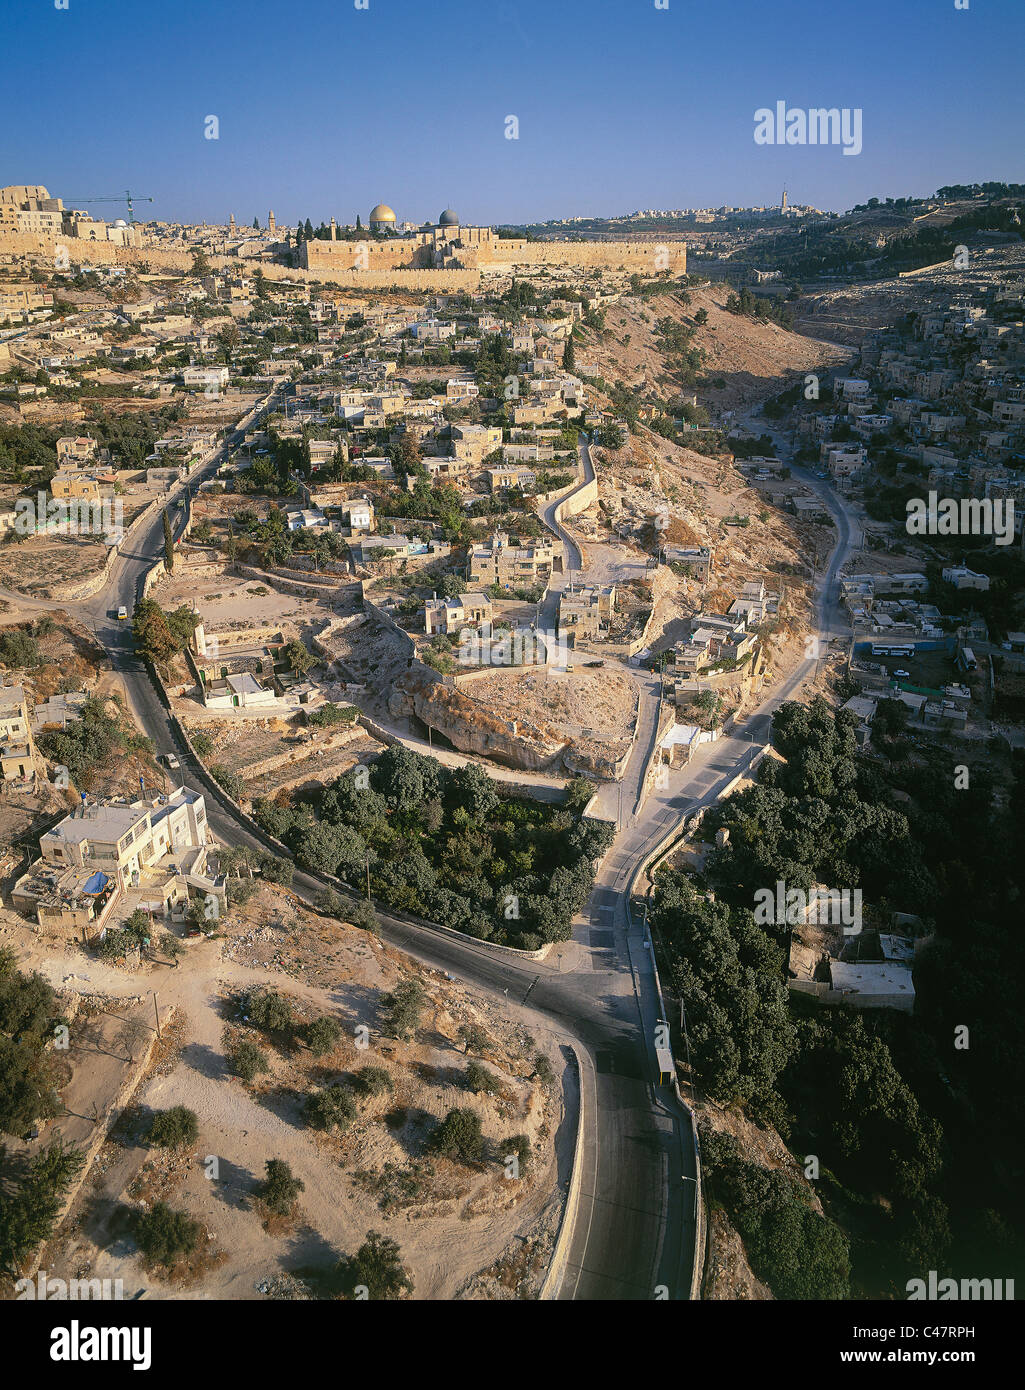 Aerial view of the city of David from the south with the Siloam pool in the foreground Stock Photo